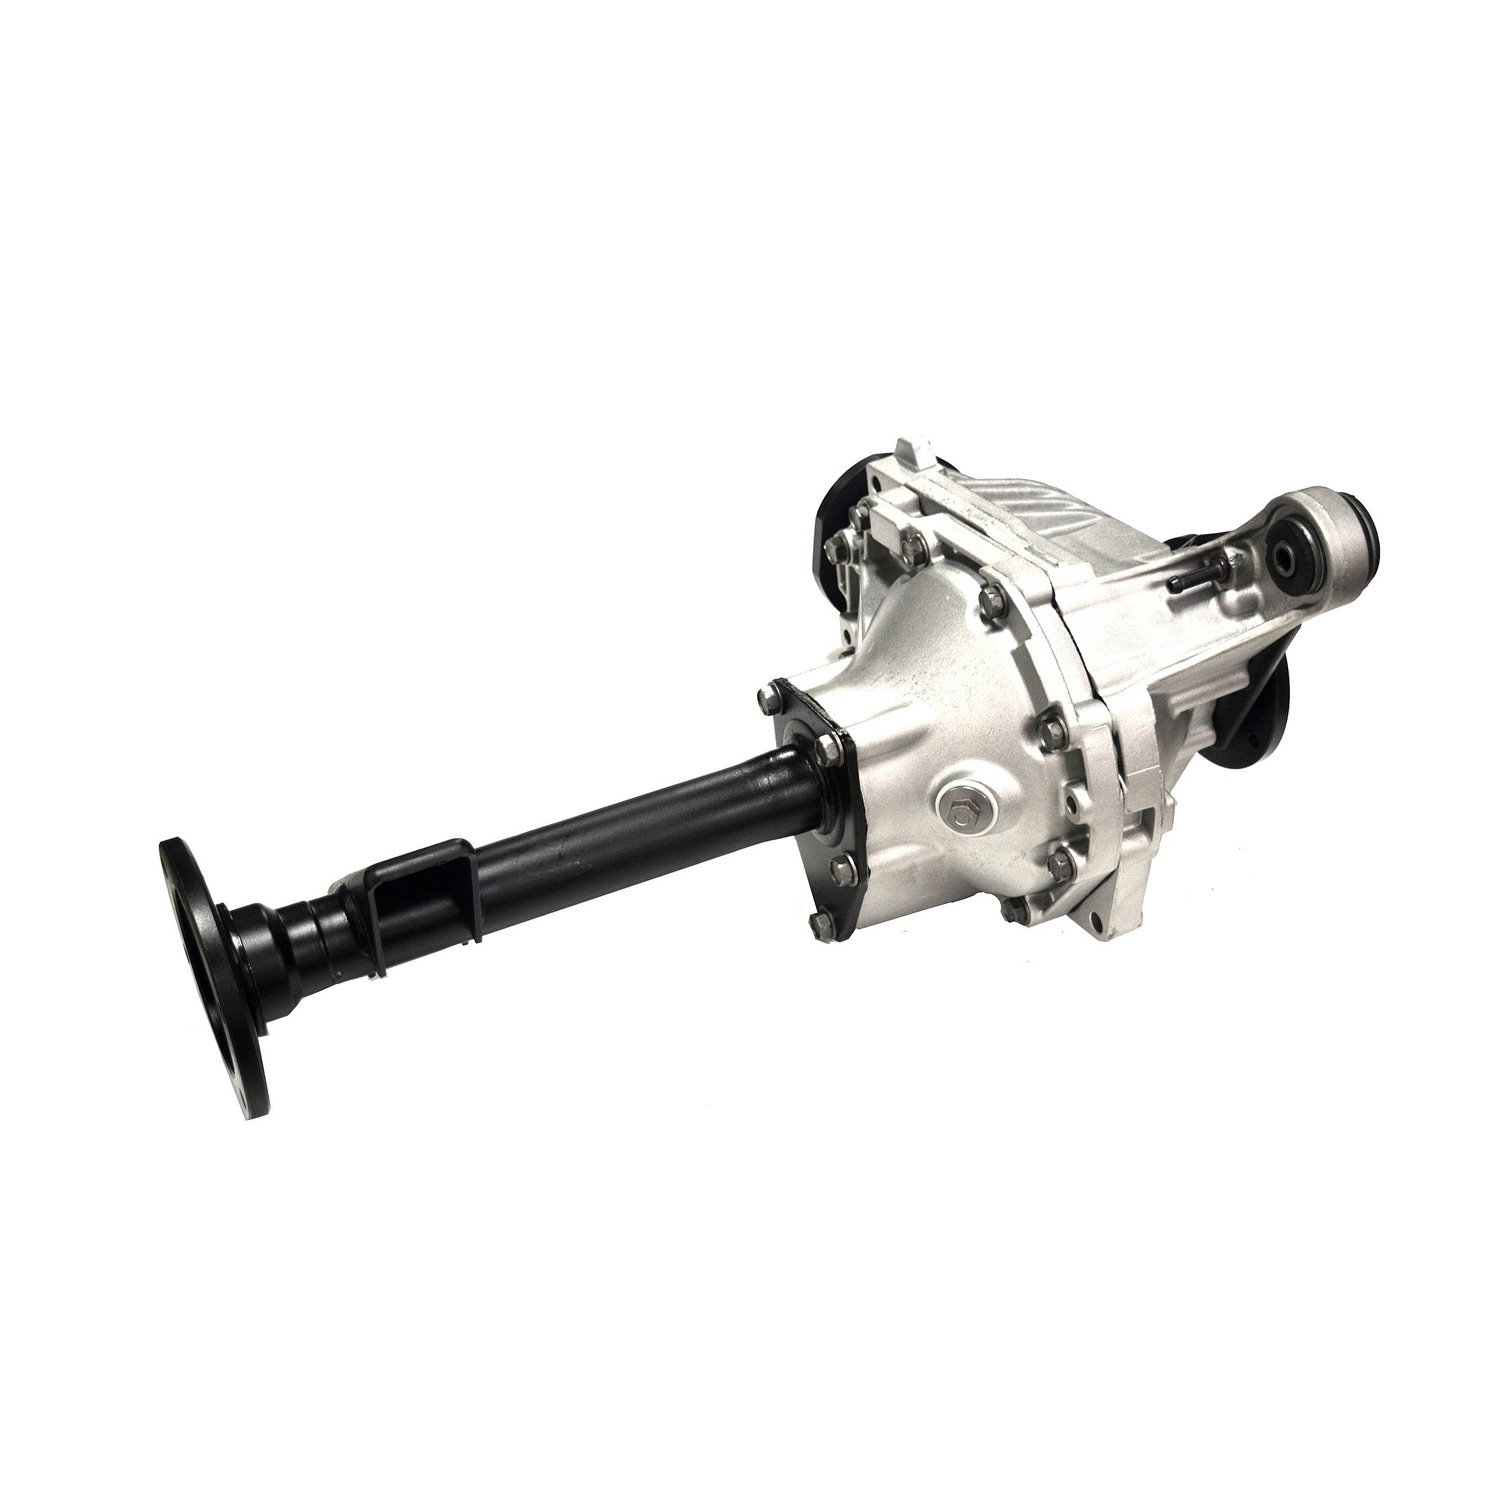 Remanufactured Axle Assembly for GM 7.2 IFS 83-87